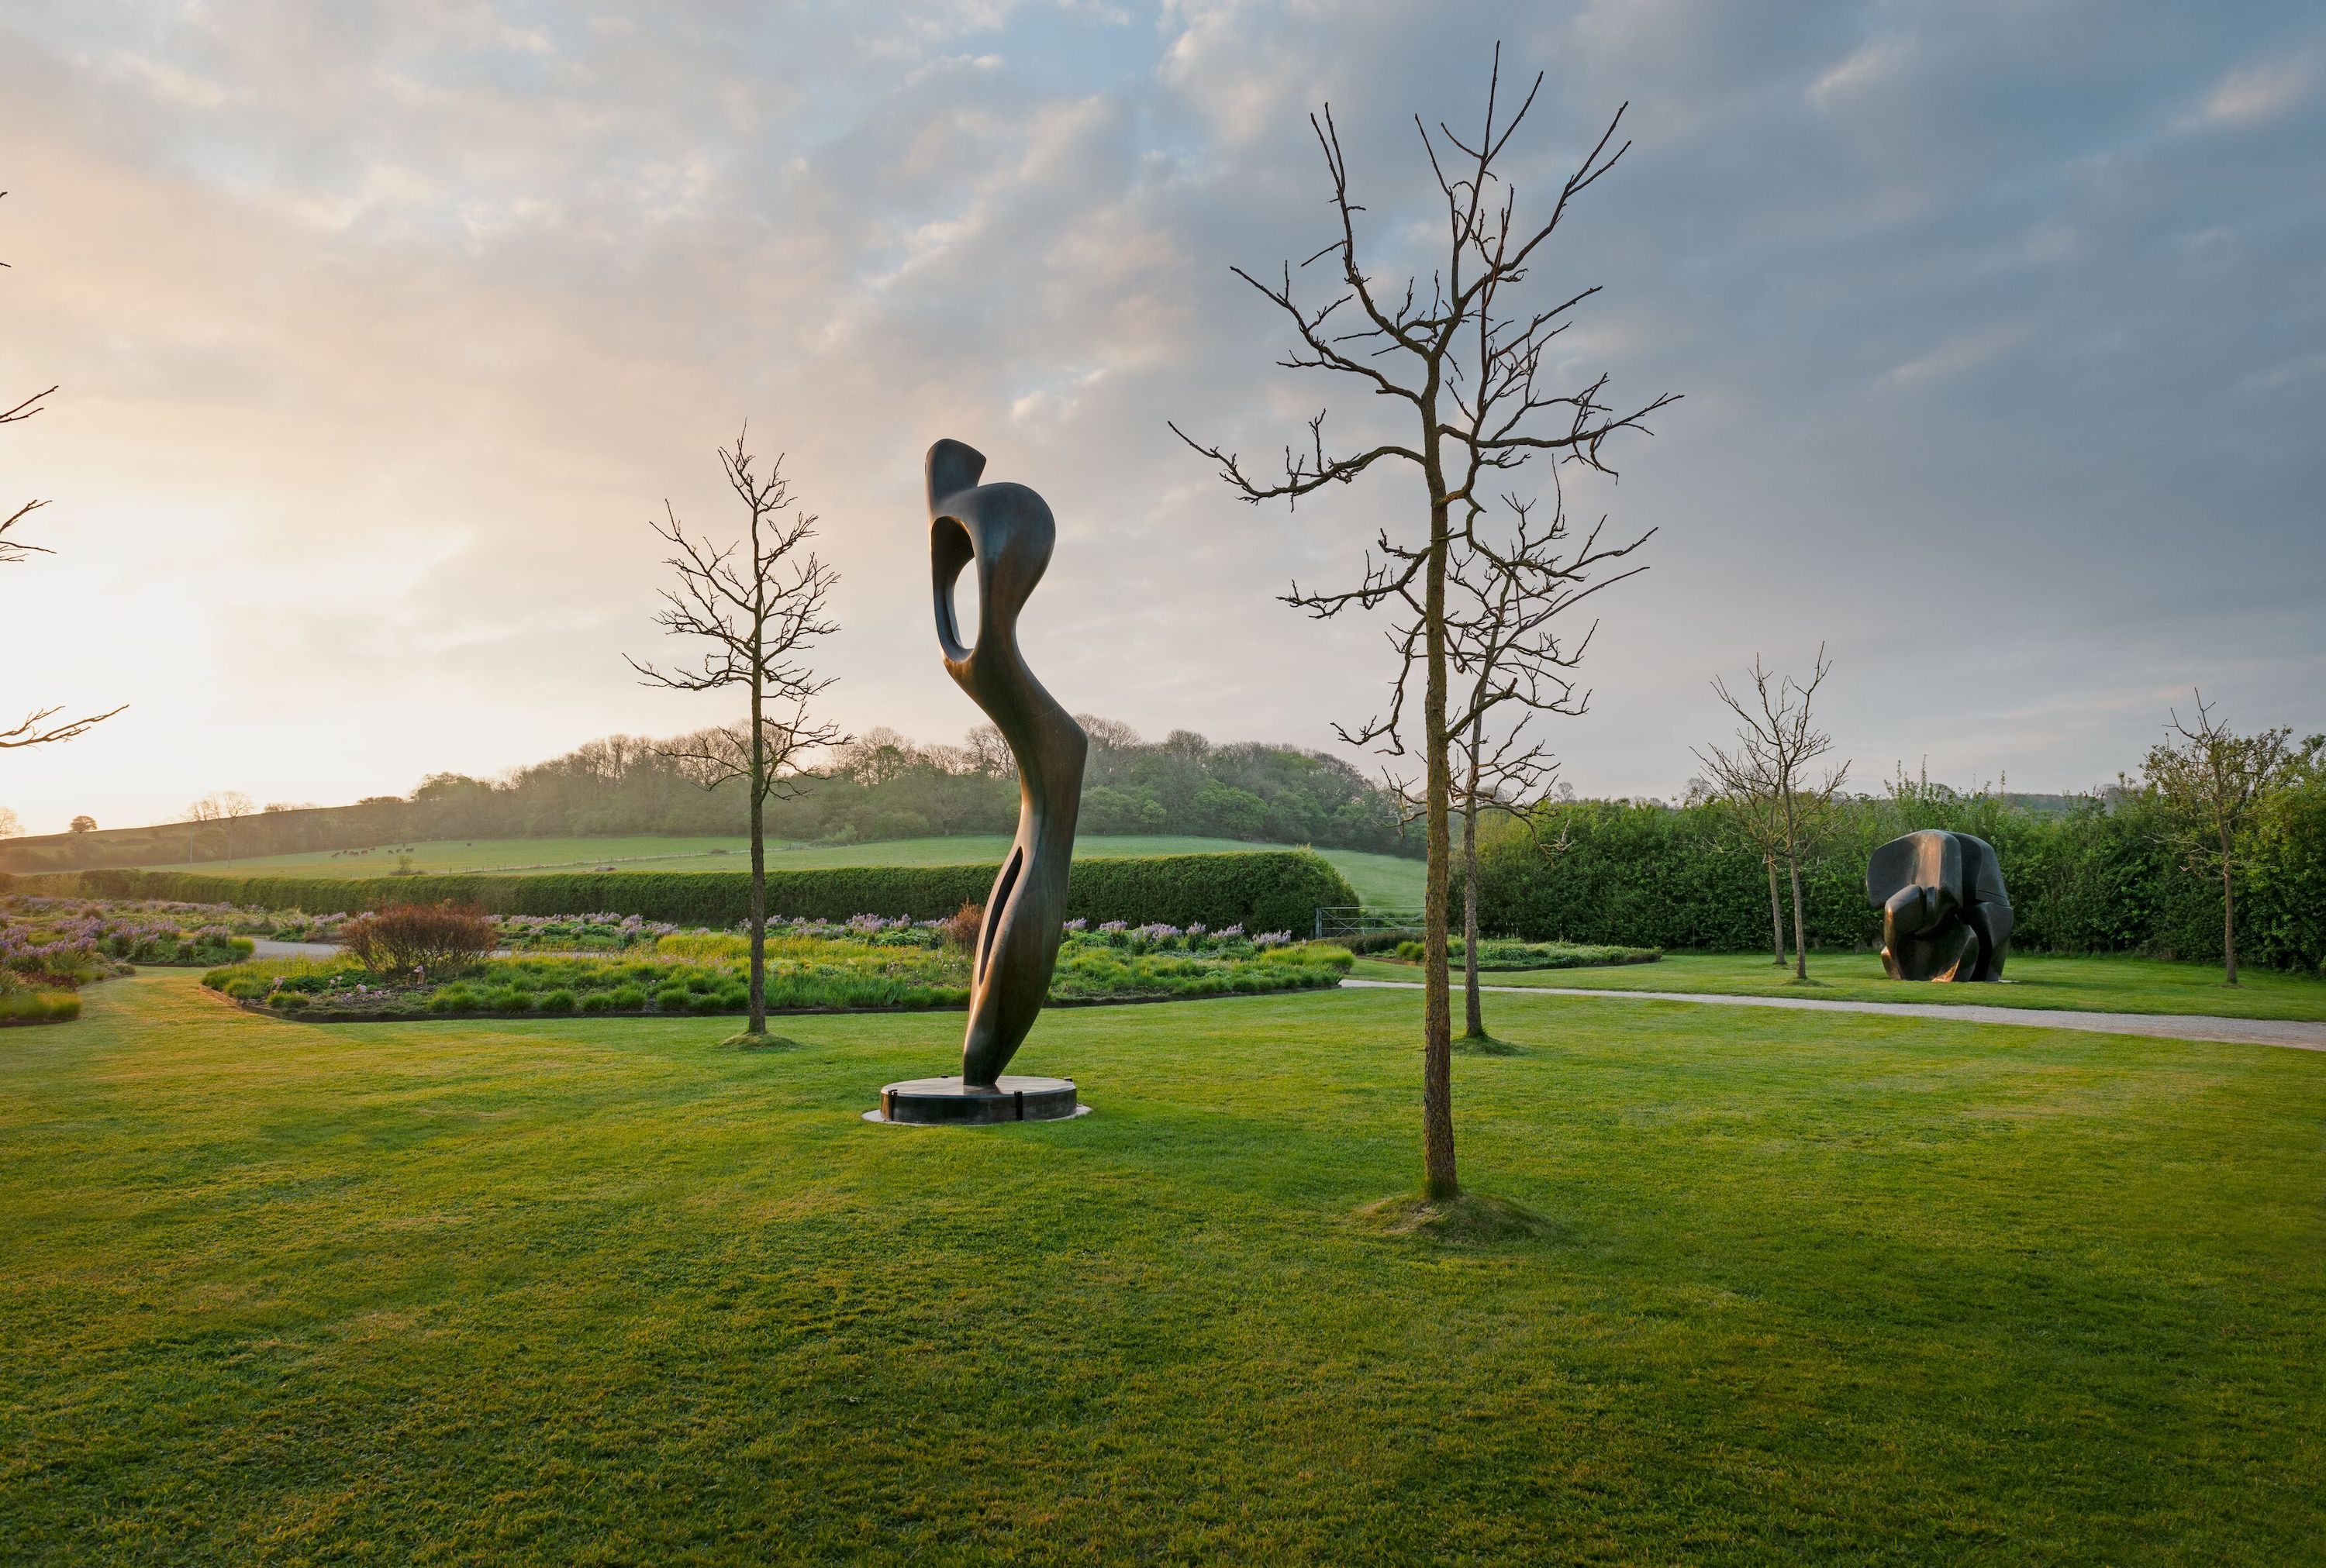 Sculpture, Stonehenge and the sublime: Hauser & Wirth’s new Somerset exhibition